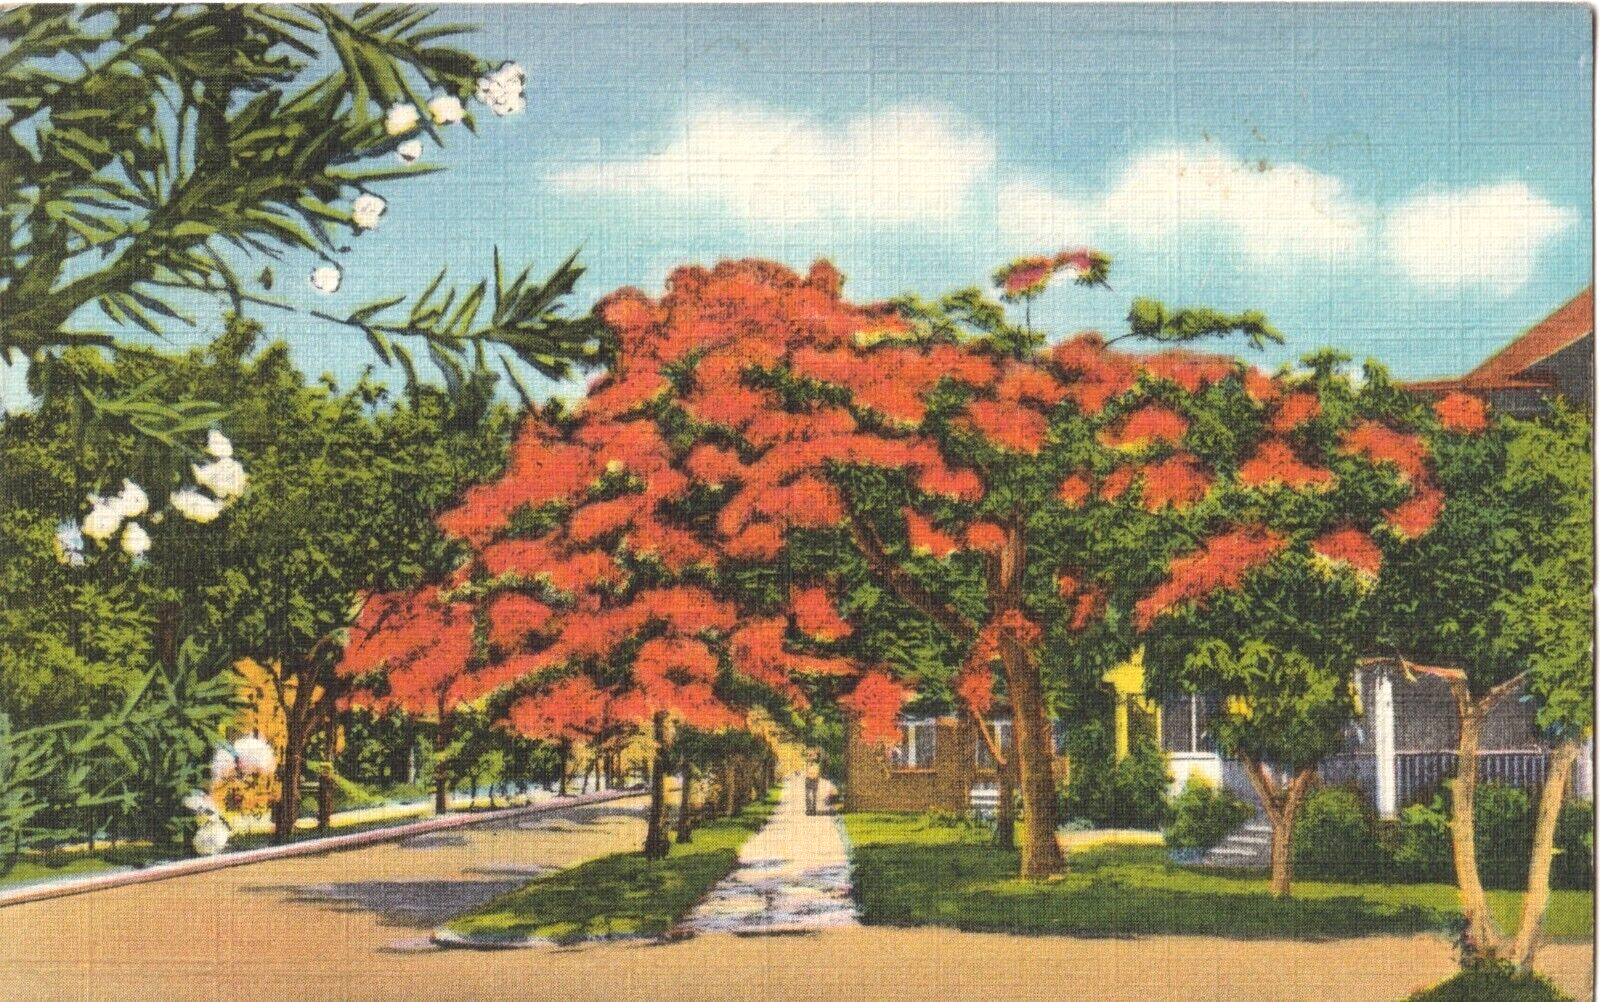 The Colorful Poinciana Tree-Florida FL-1938 posted postcard